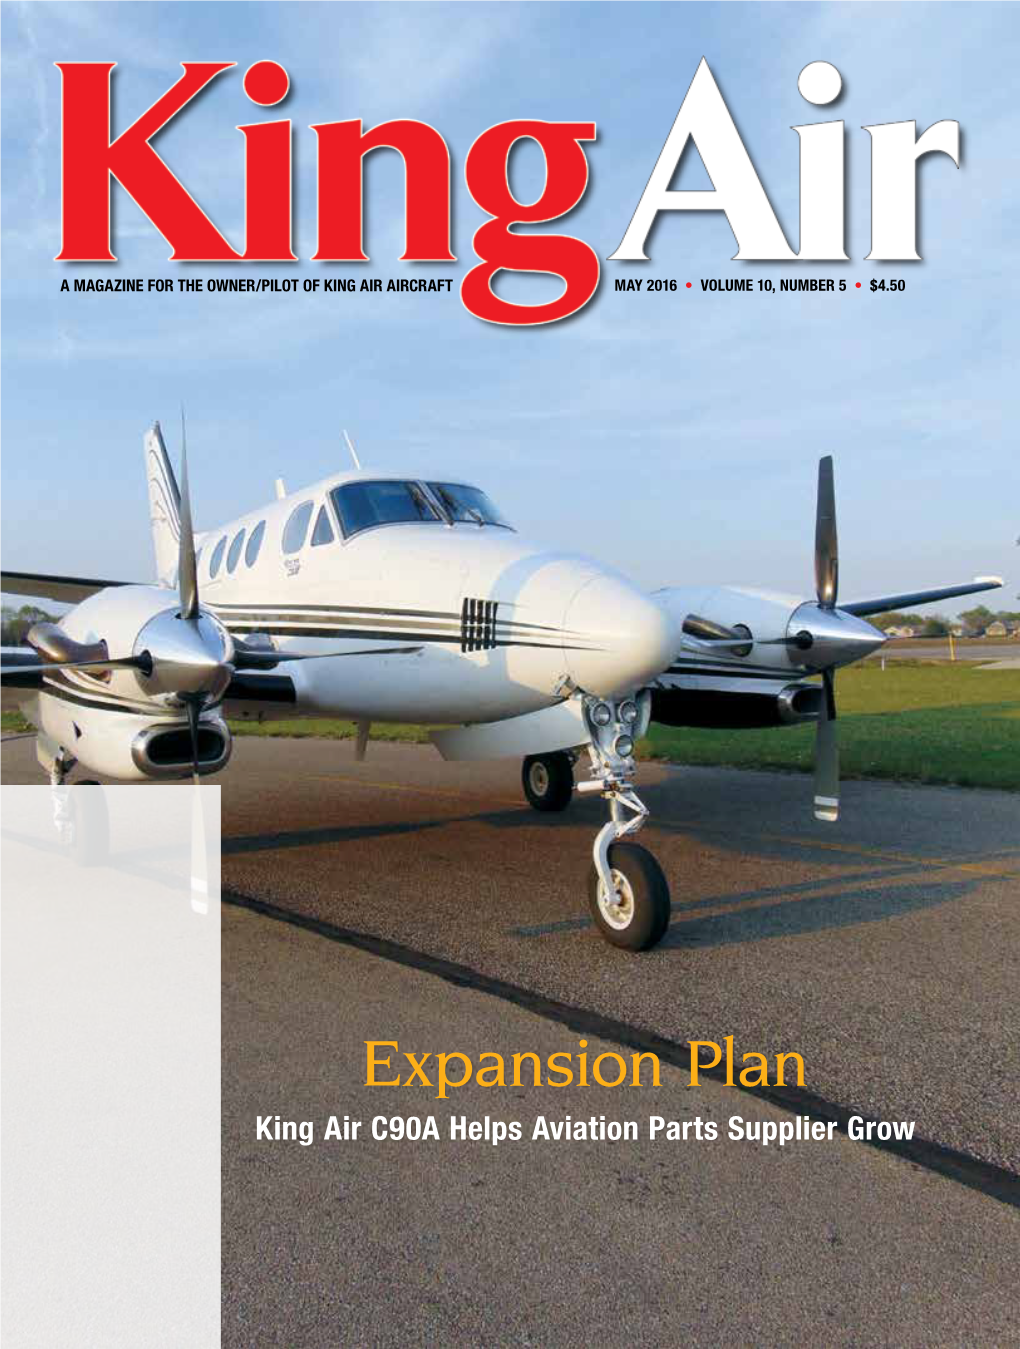 Expansion Plan King Air C90A Helps Aviation Parts Supplier Grow